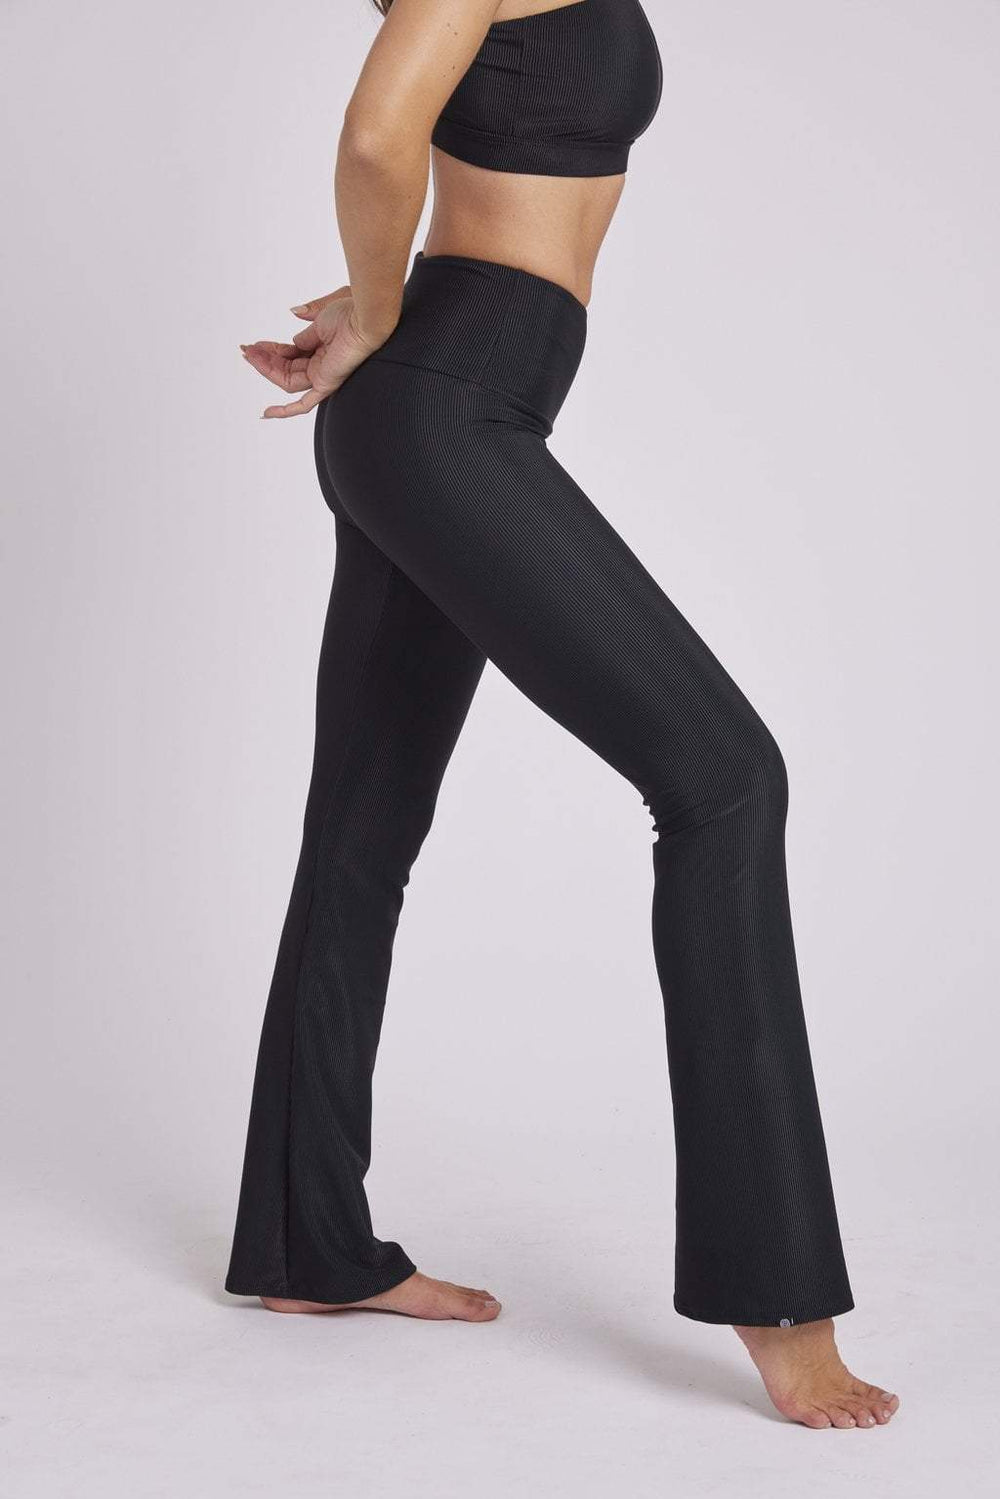 Yoga Pants and Bottoms for Women – Page 2 – ONZIE